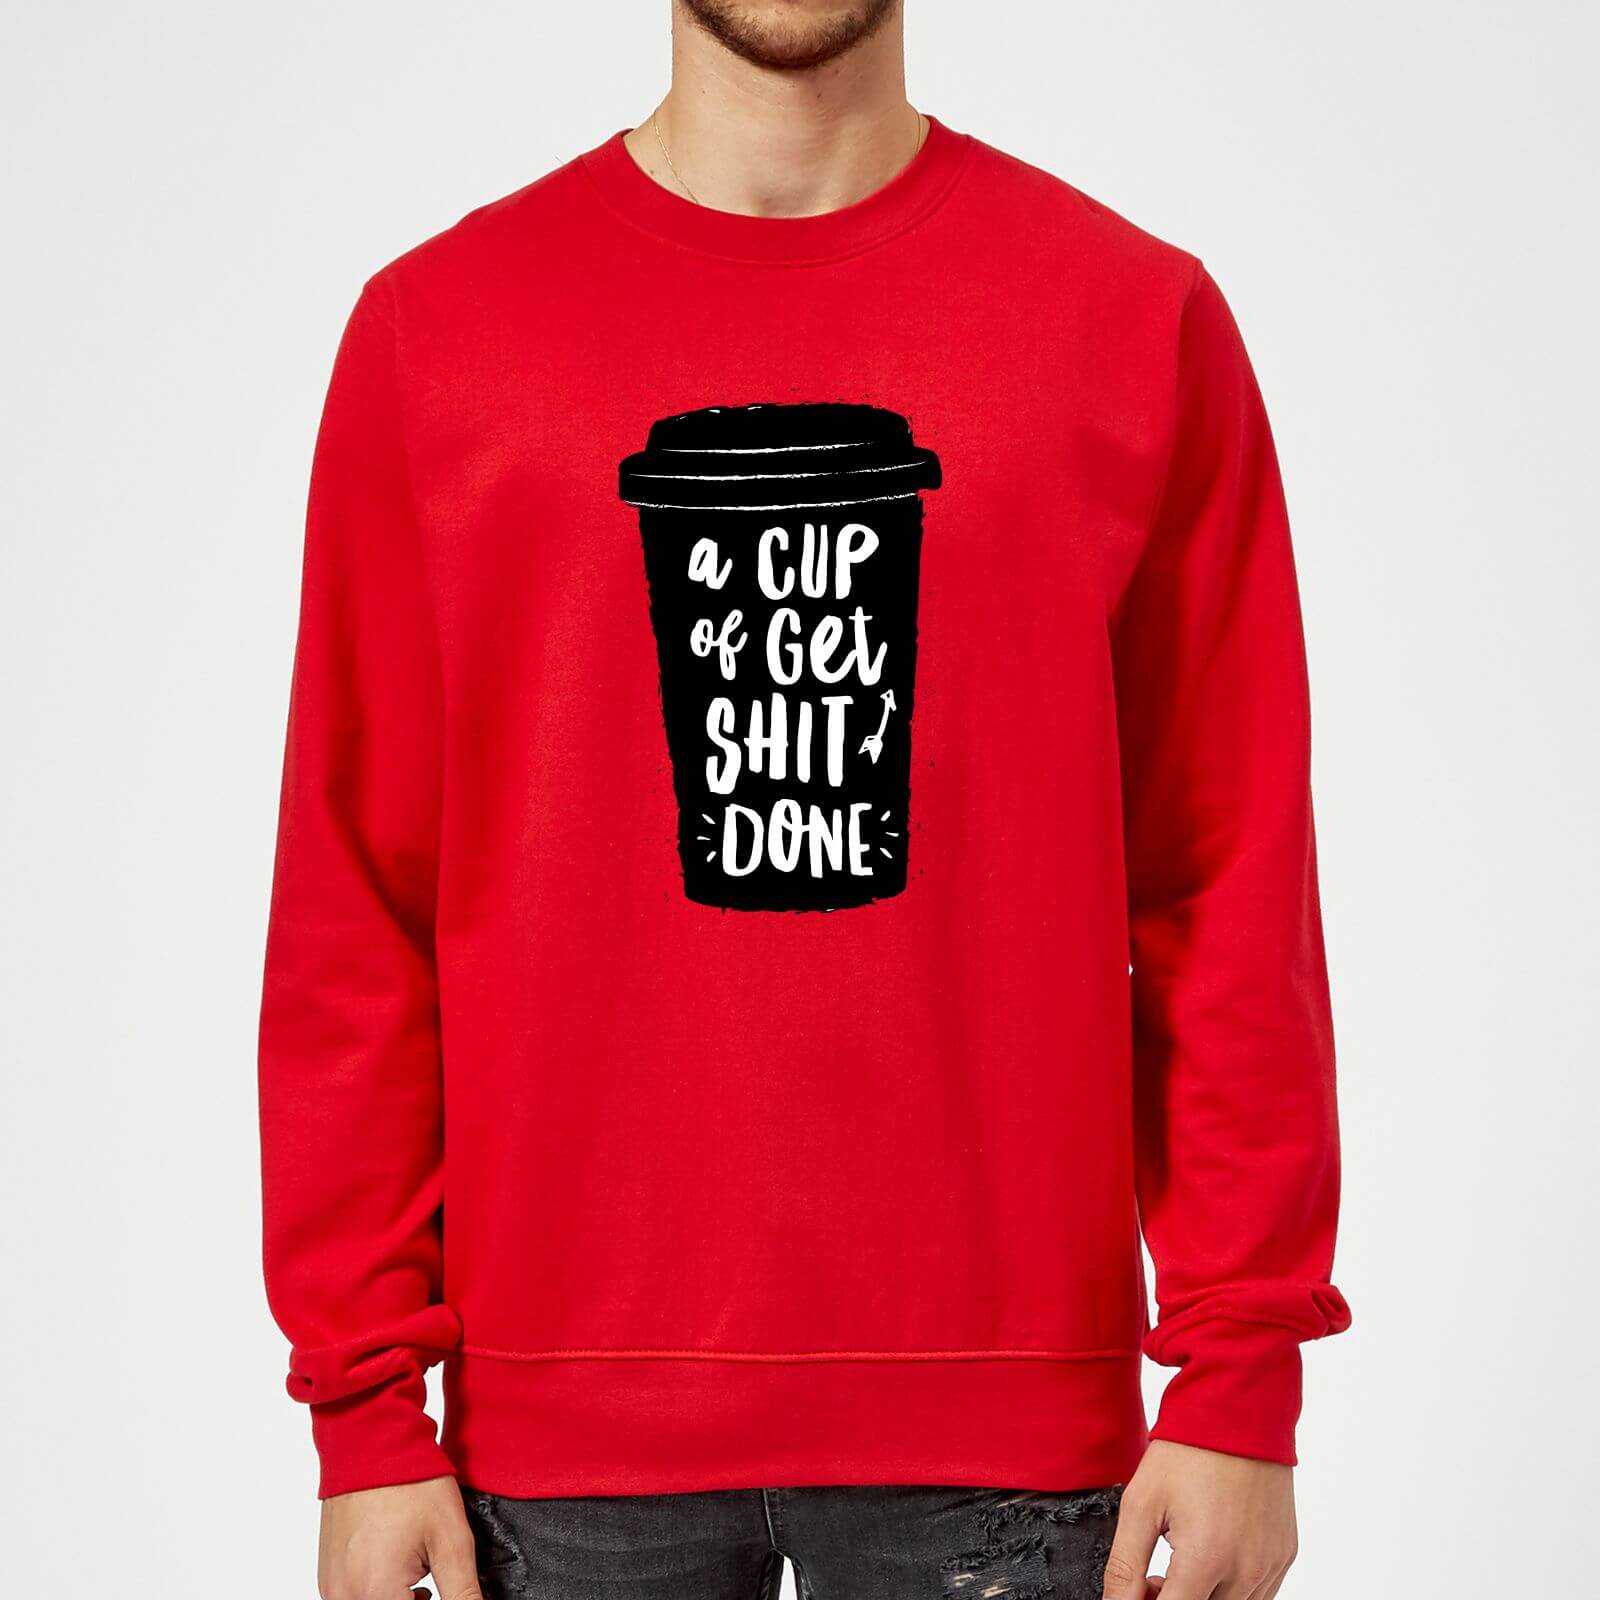 The Motivated Type A Cup Of Get Shit Done Sweatshirt - Red - M - Red